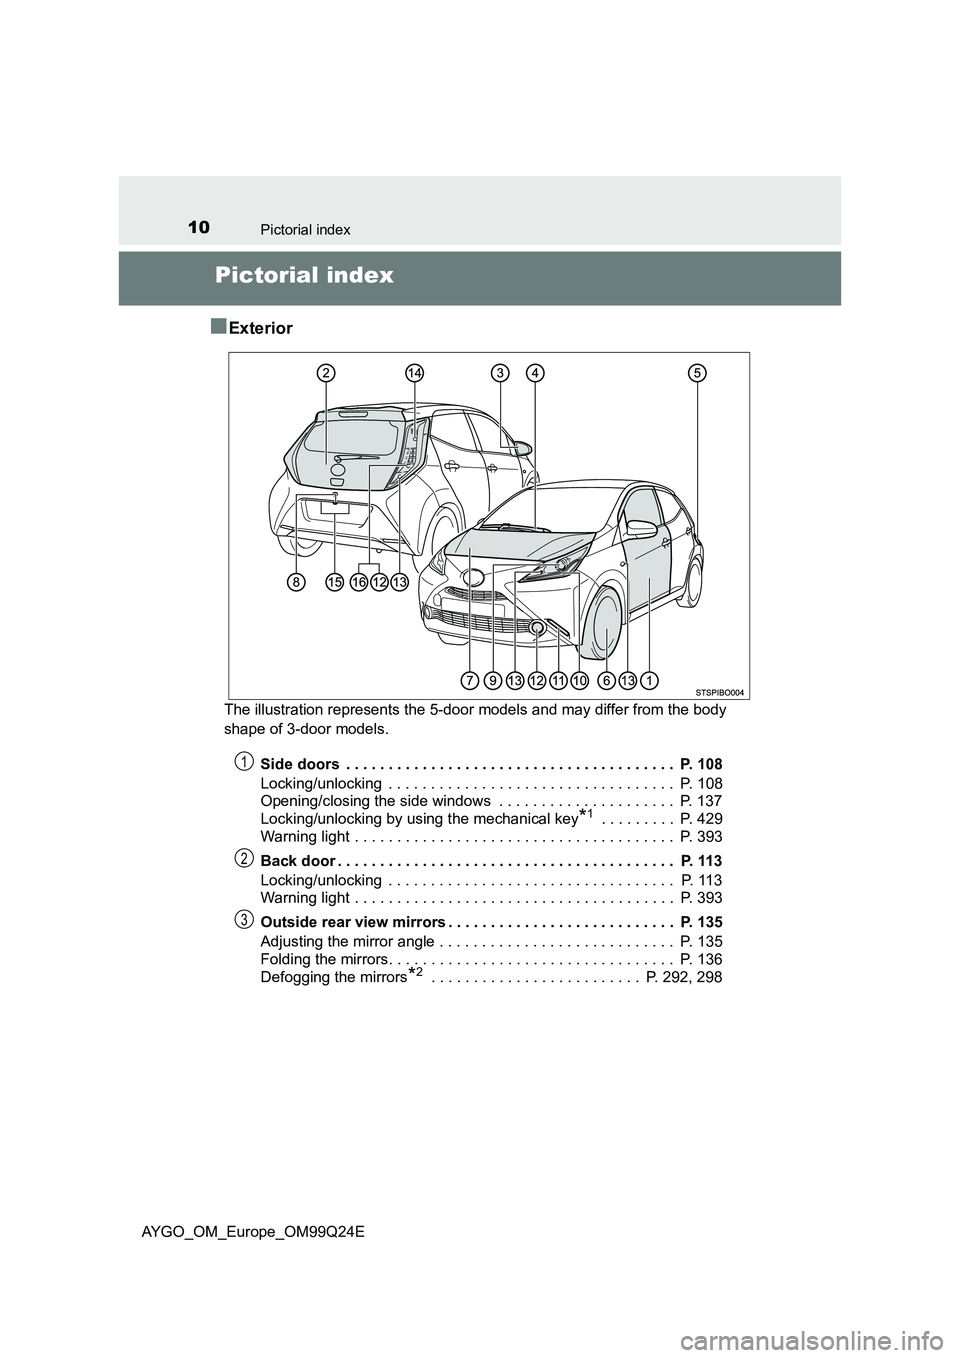 TOYOTA AYGO 2017  Owners Manual (in English) 10Pictorial index
AYGO_OM_Europe_OM99Q24E
Pictorial index 
■Exterior
The illustration represents the 5-door  models and may differ from the body  
shape of 3-door models. 
Side doors  . . . . . . . 